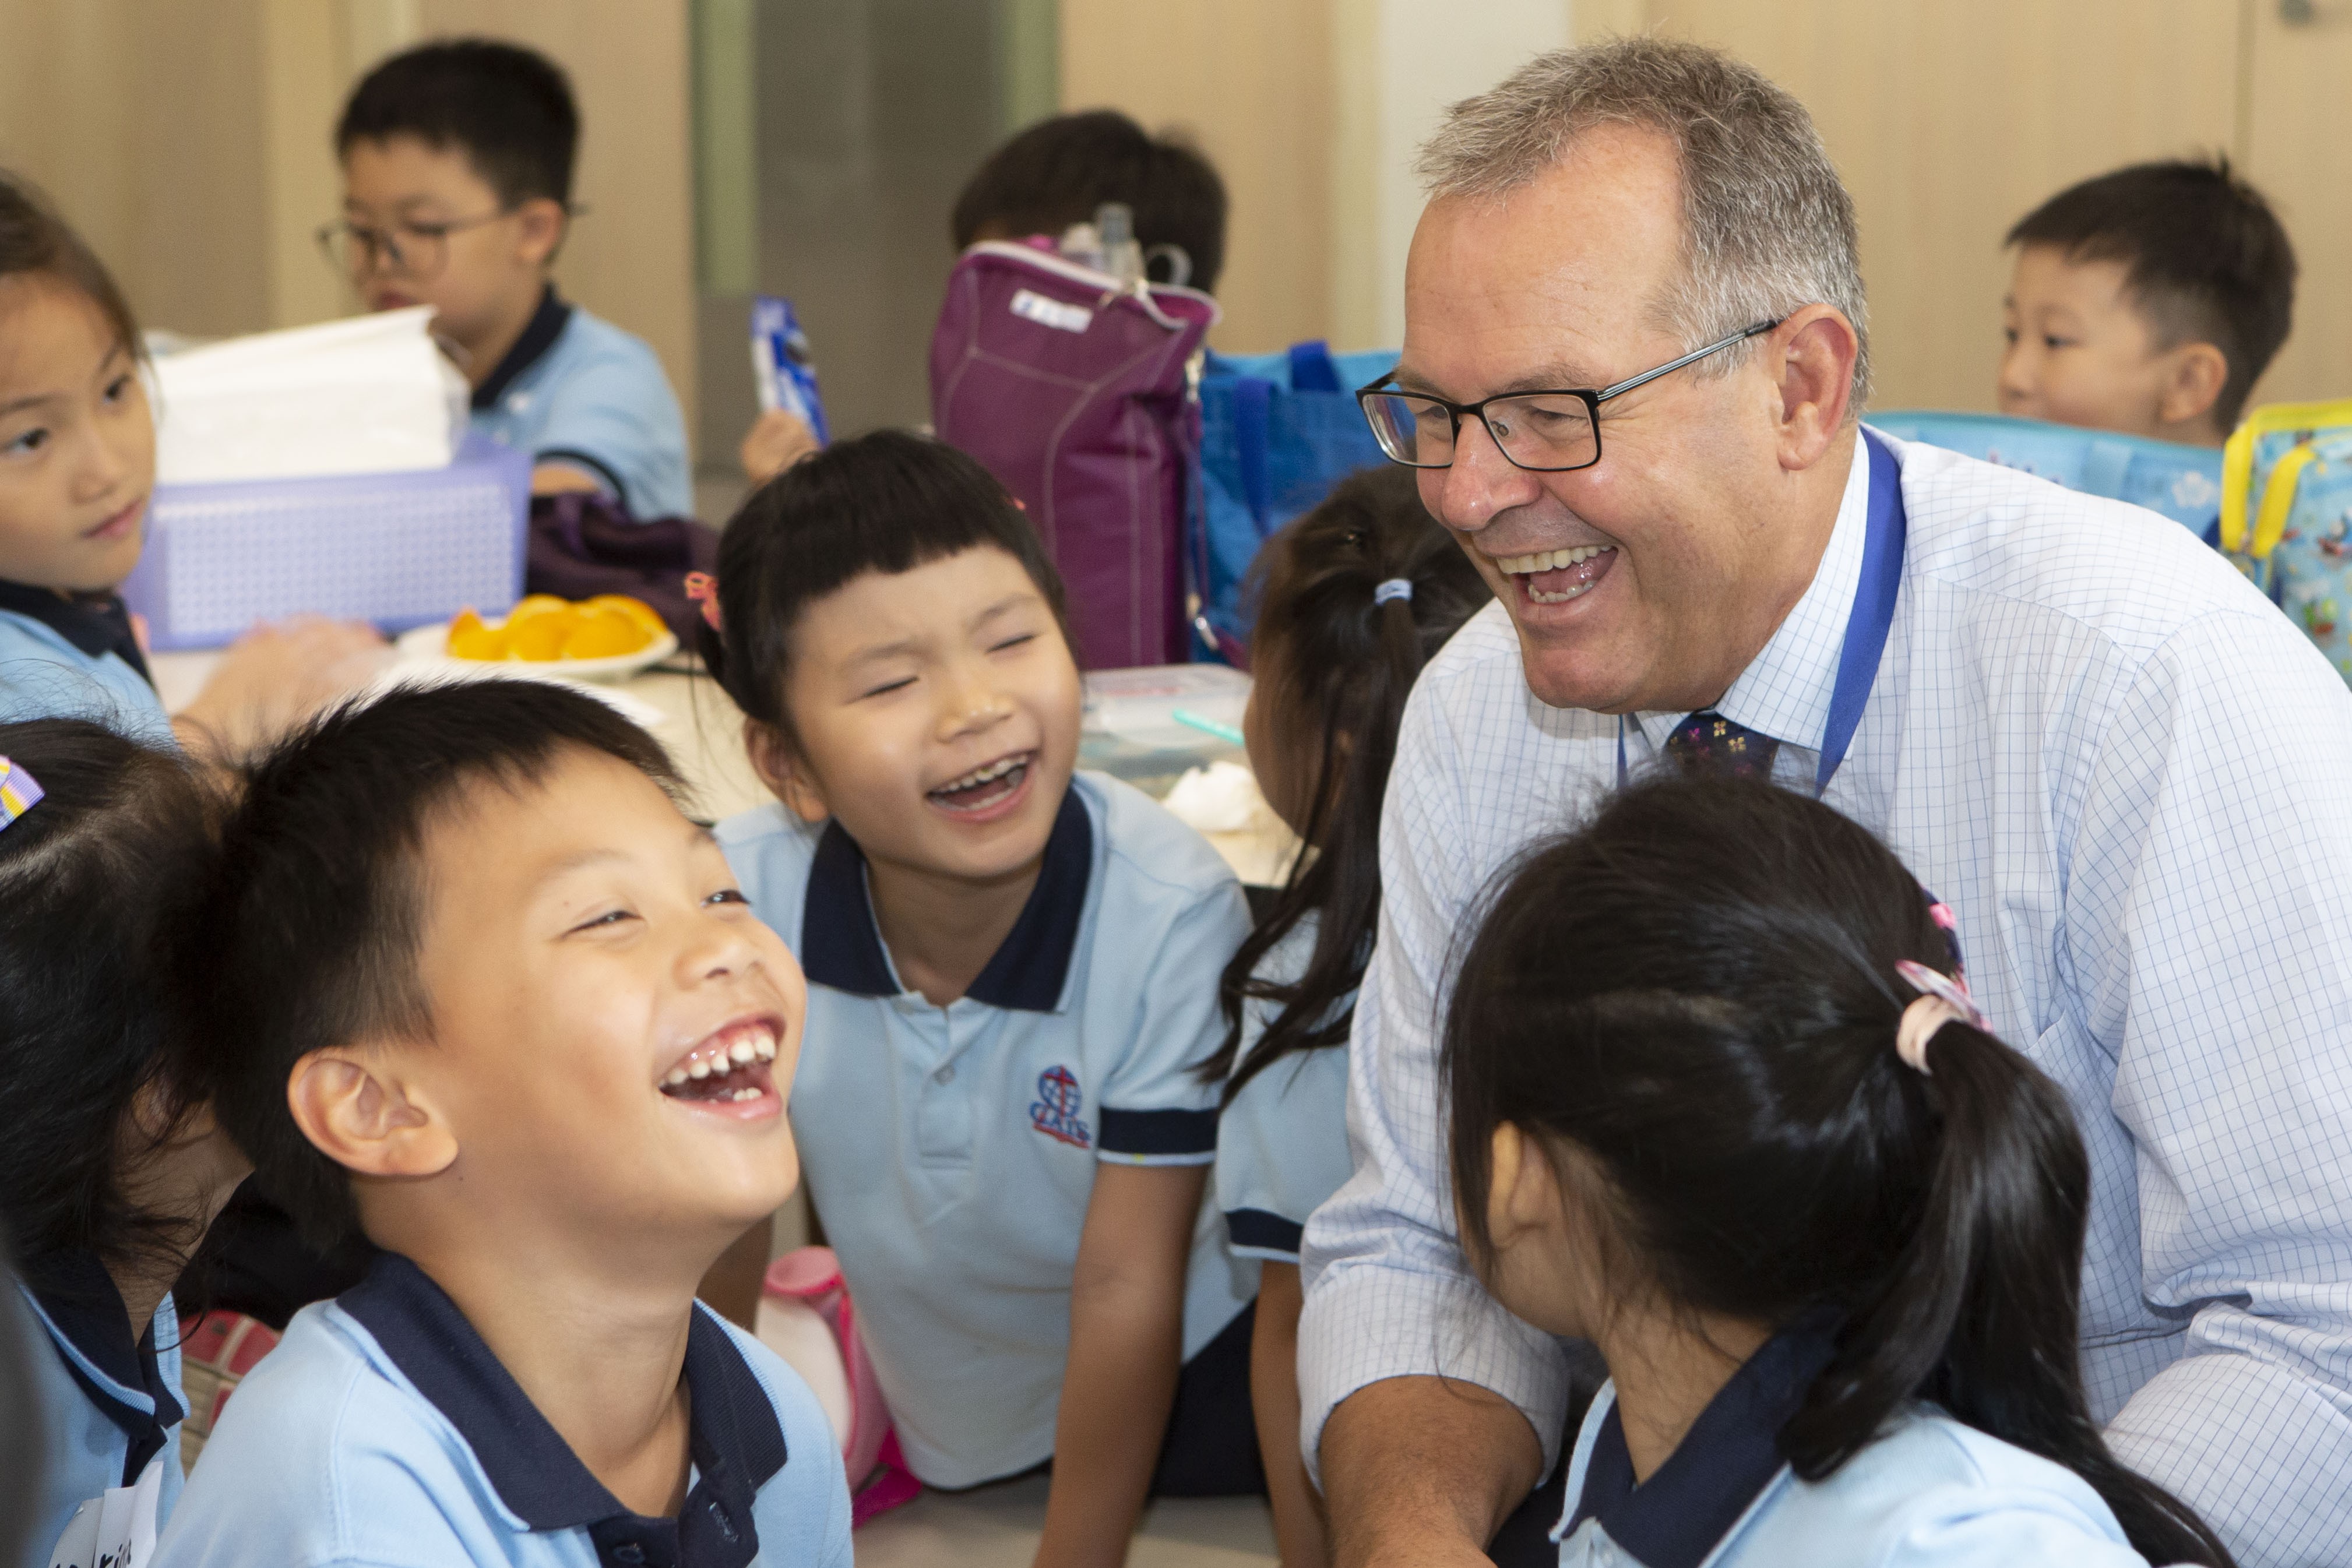 Richard Vanderpyl (above), head of school at Hong Kong’s Christian Alliance International School, says it is important to nurture in children a willingness to serve the needs of others and develop a sense of responsibility towards their community.